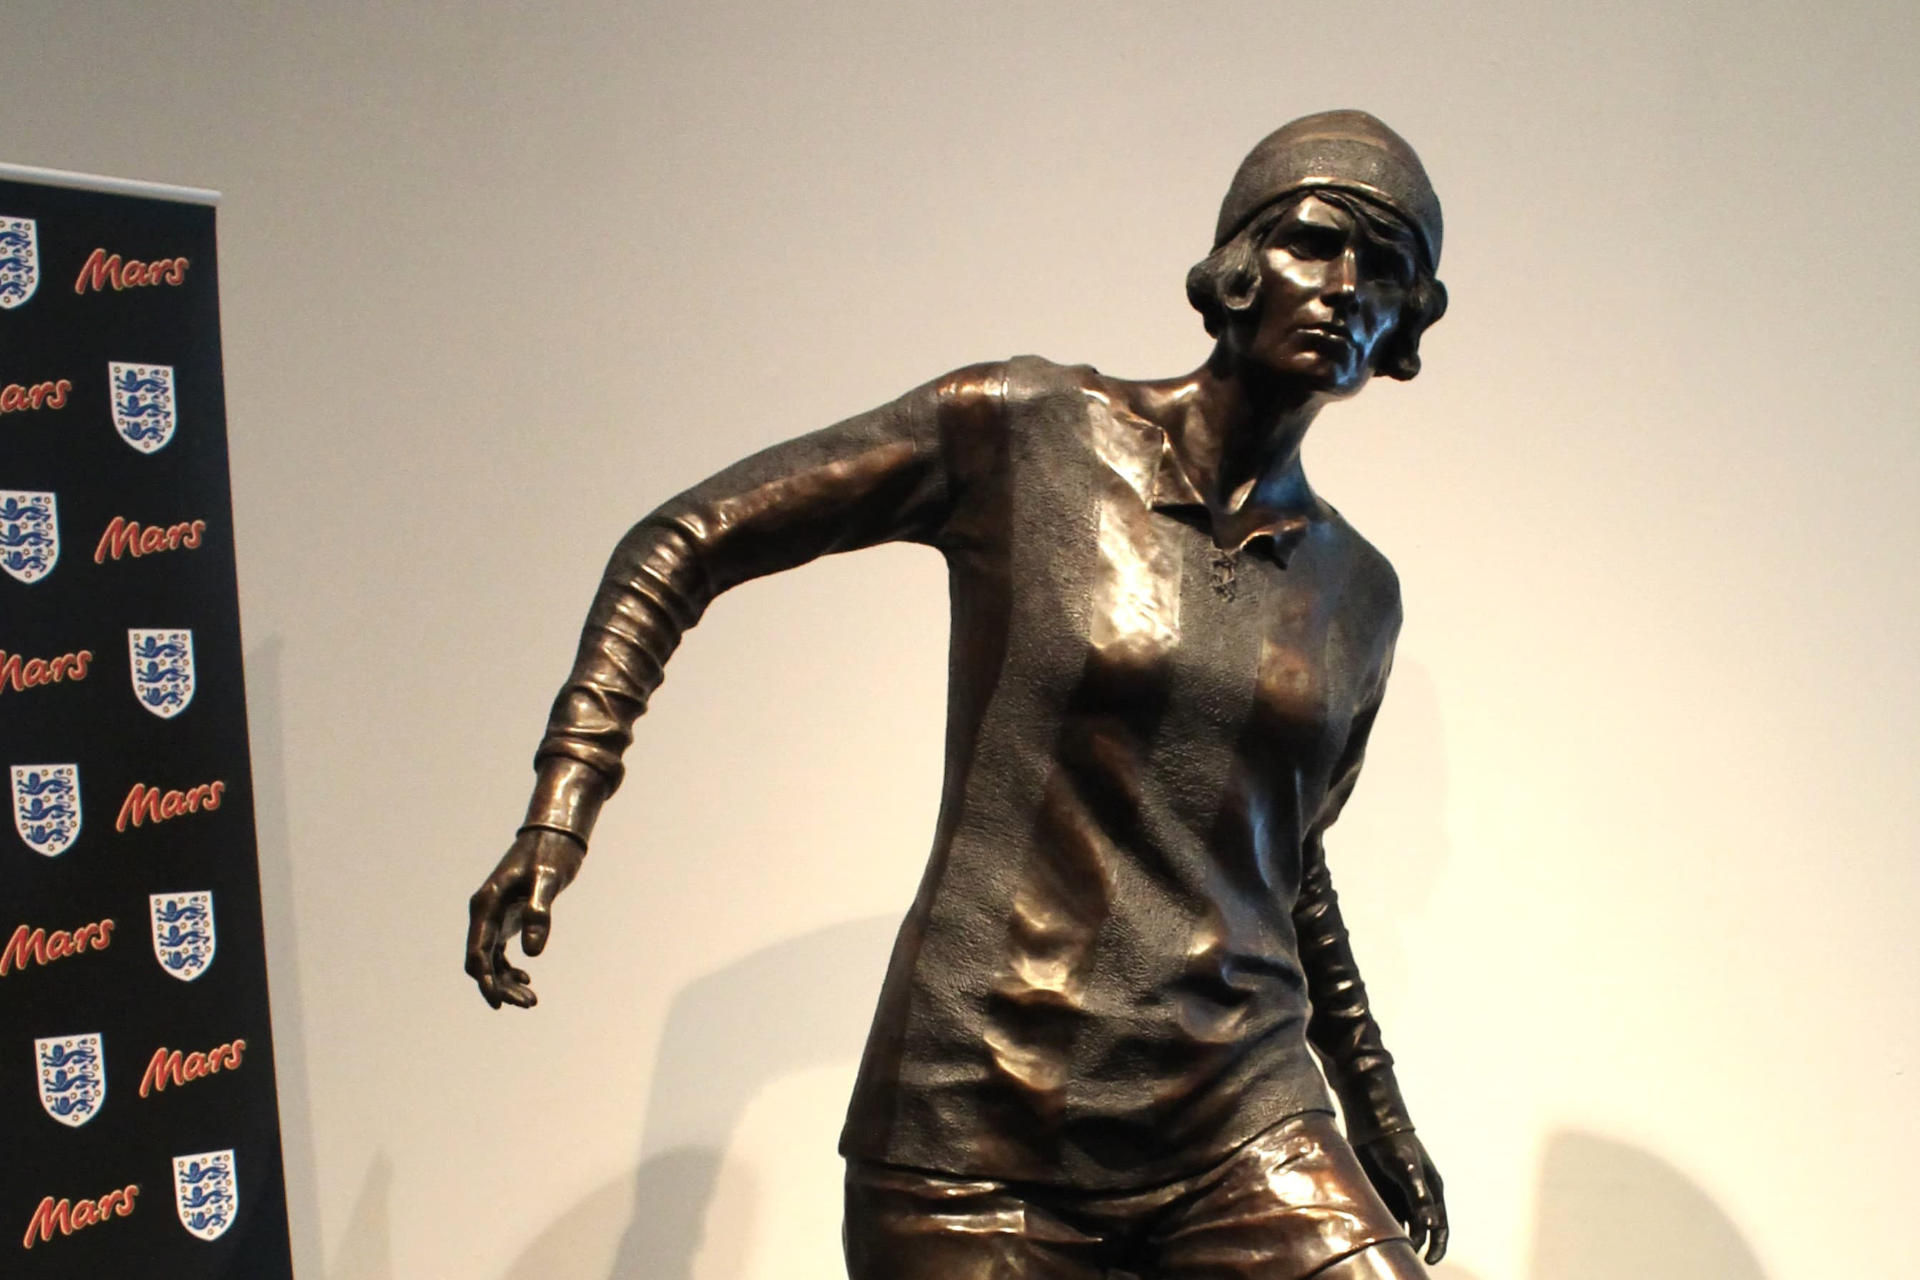 Bronze sculpture of Lily Parr at the National Football Museum